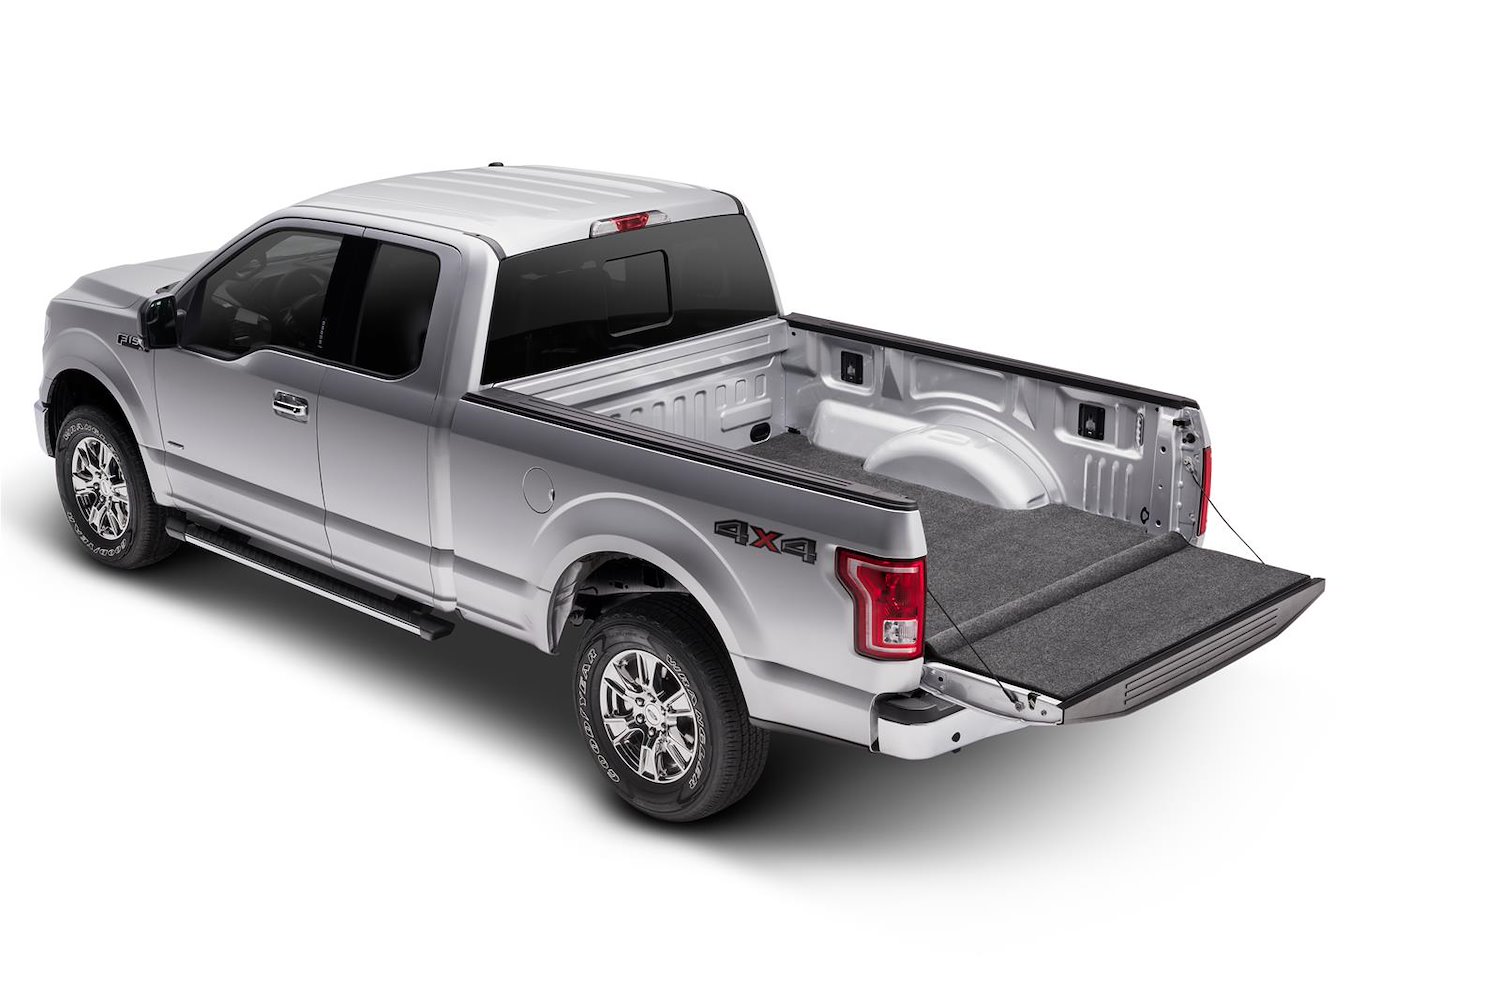 XLTBMC07CCS XLT BEDMAT FOR SPRAY-IN OR NO BED LINER 07-18 SILVERADO/SIERRA 5'8" BED